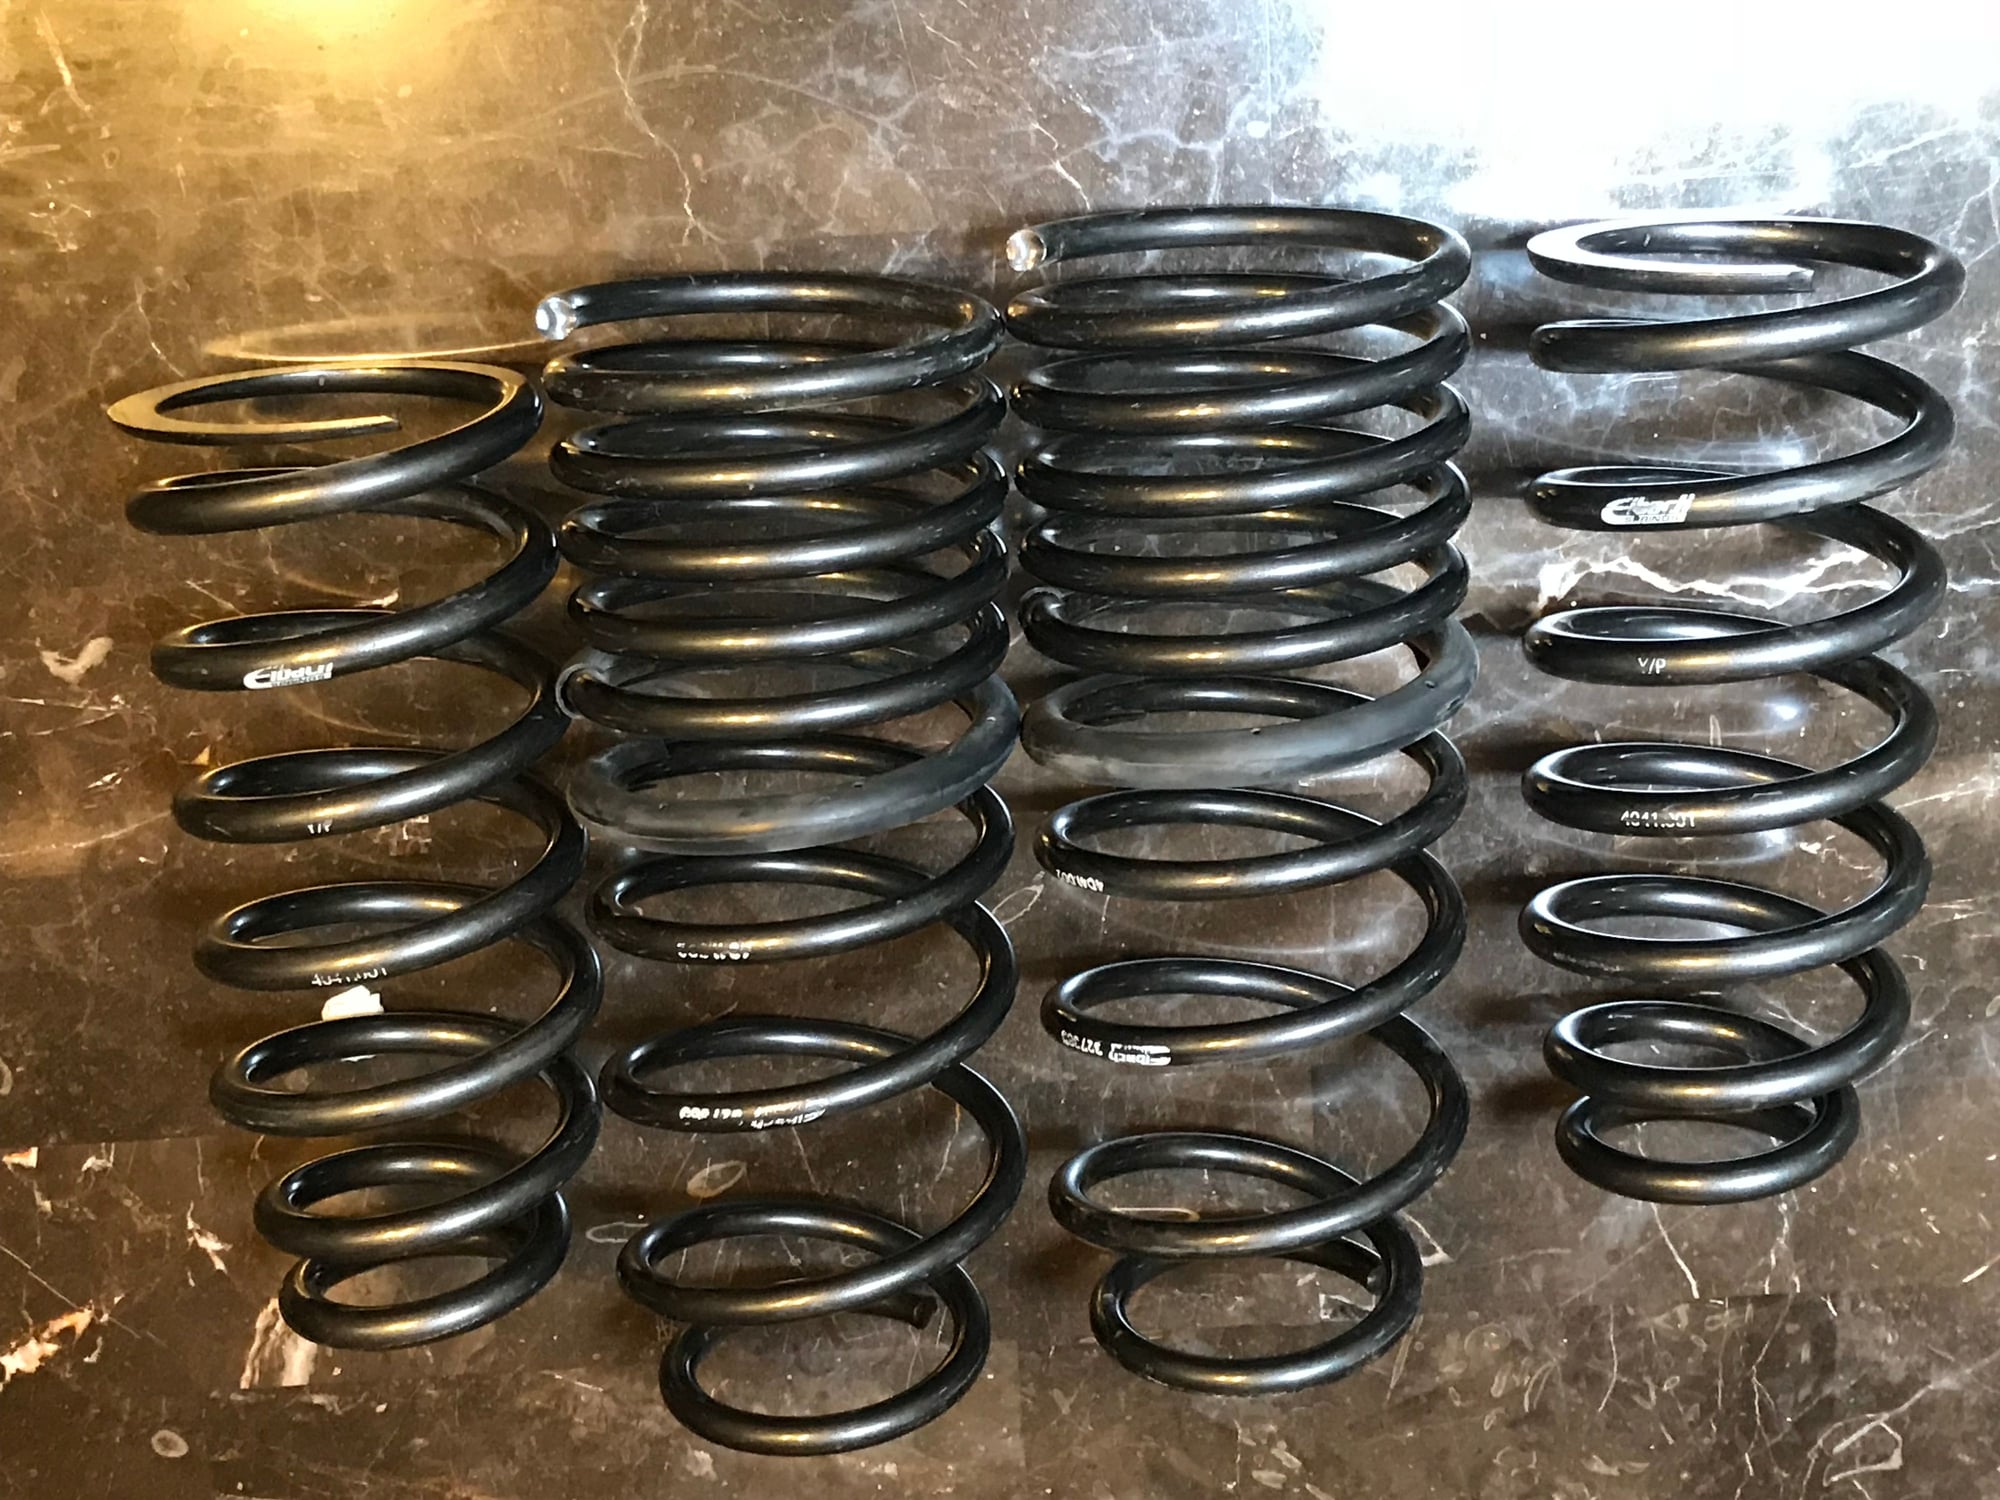 Steering/Suspension - SOLD: EIBACH 4041.140 Pro-Kit Lowering Springs - Used - 1999 to 2003 Acura CL - 1999 to 2003 Acura TL - 1995 to 2003 Honda Accord - Plano, TX 75023, United States